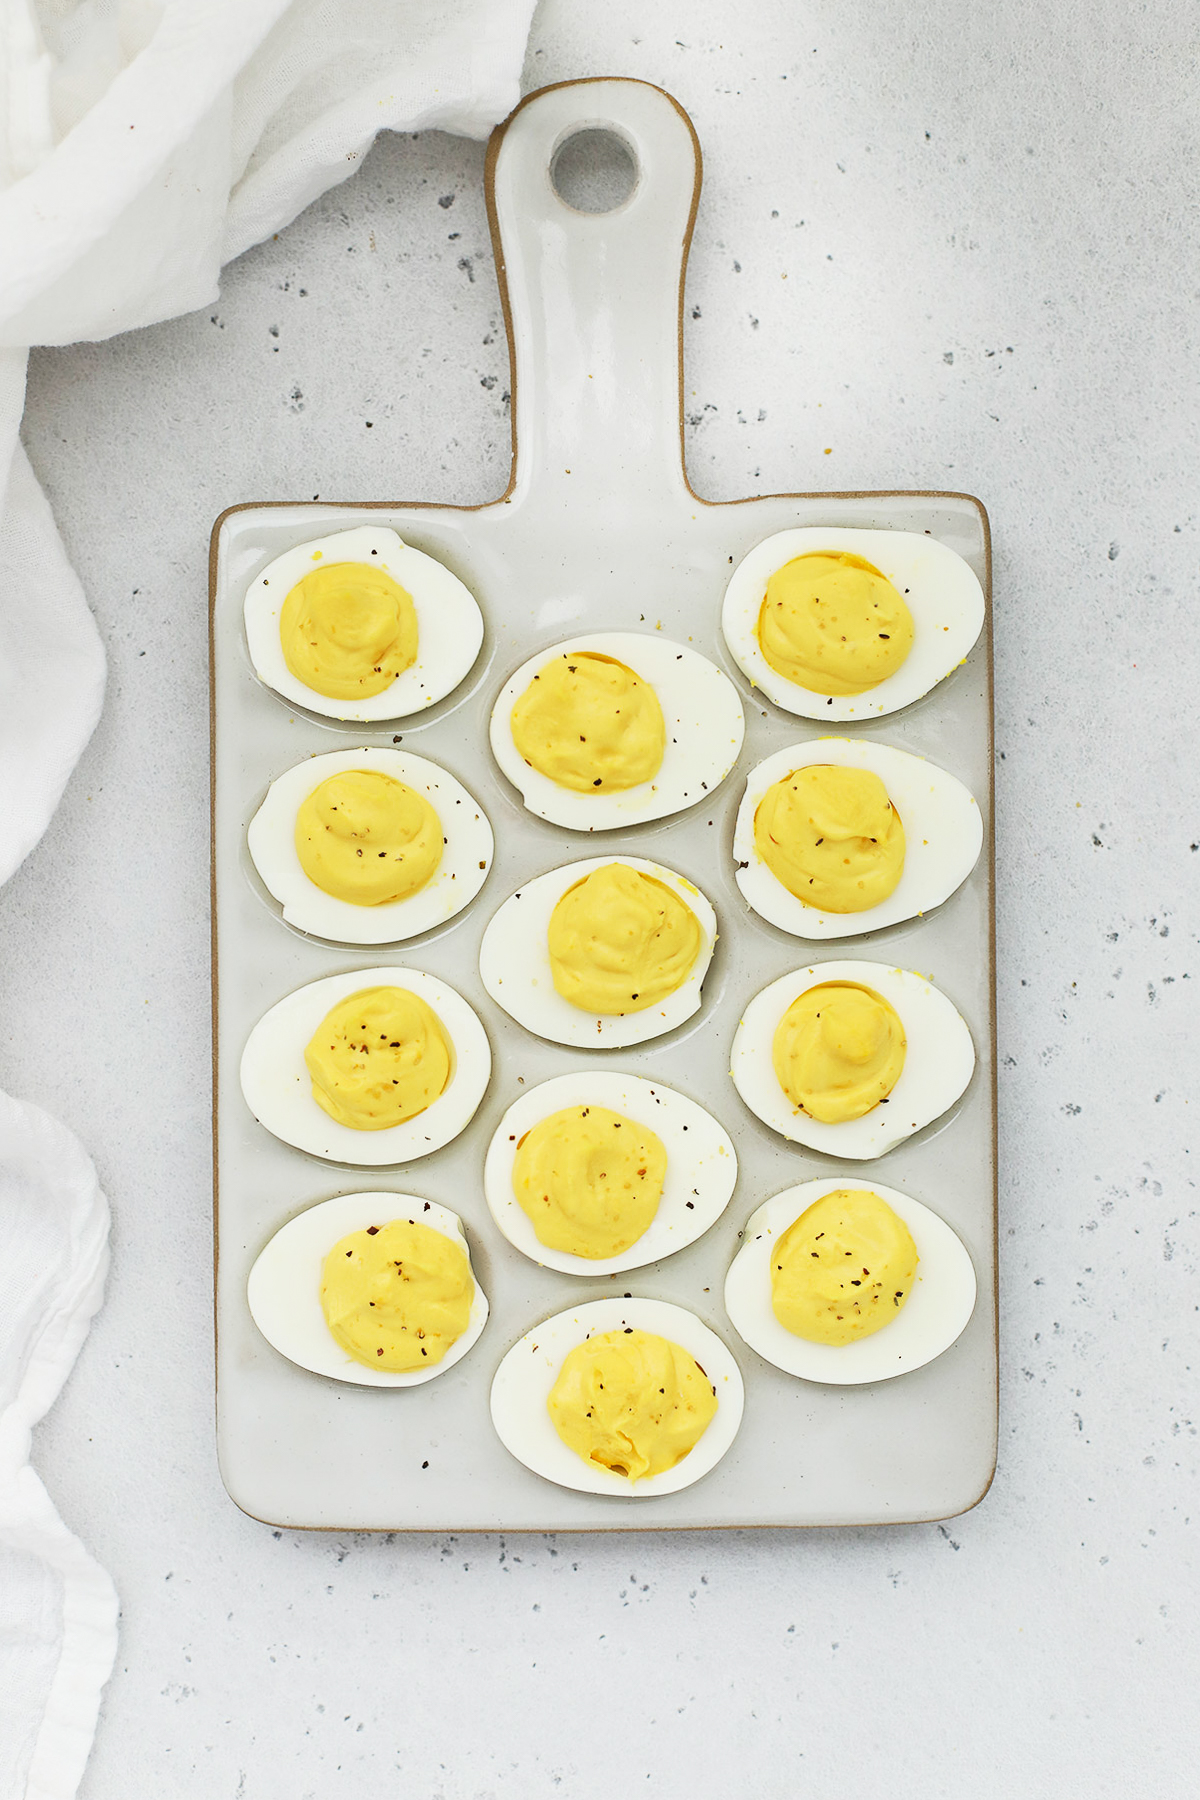 Overhead view of classic deviled eggs on a white egg platter